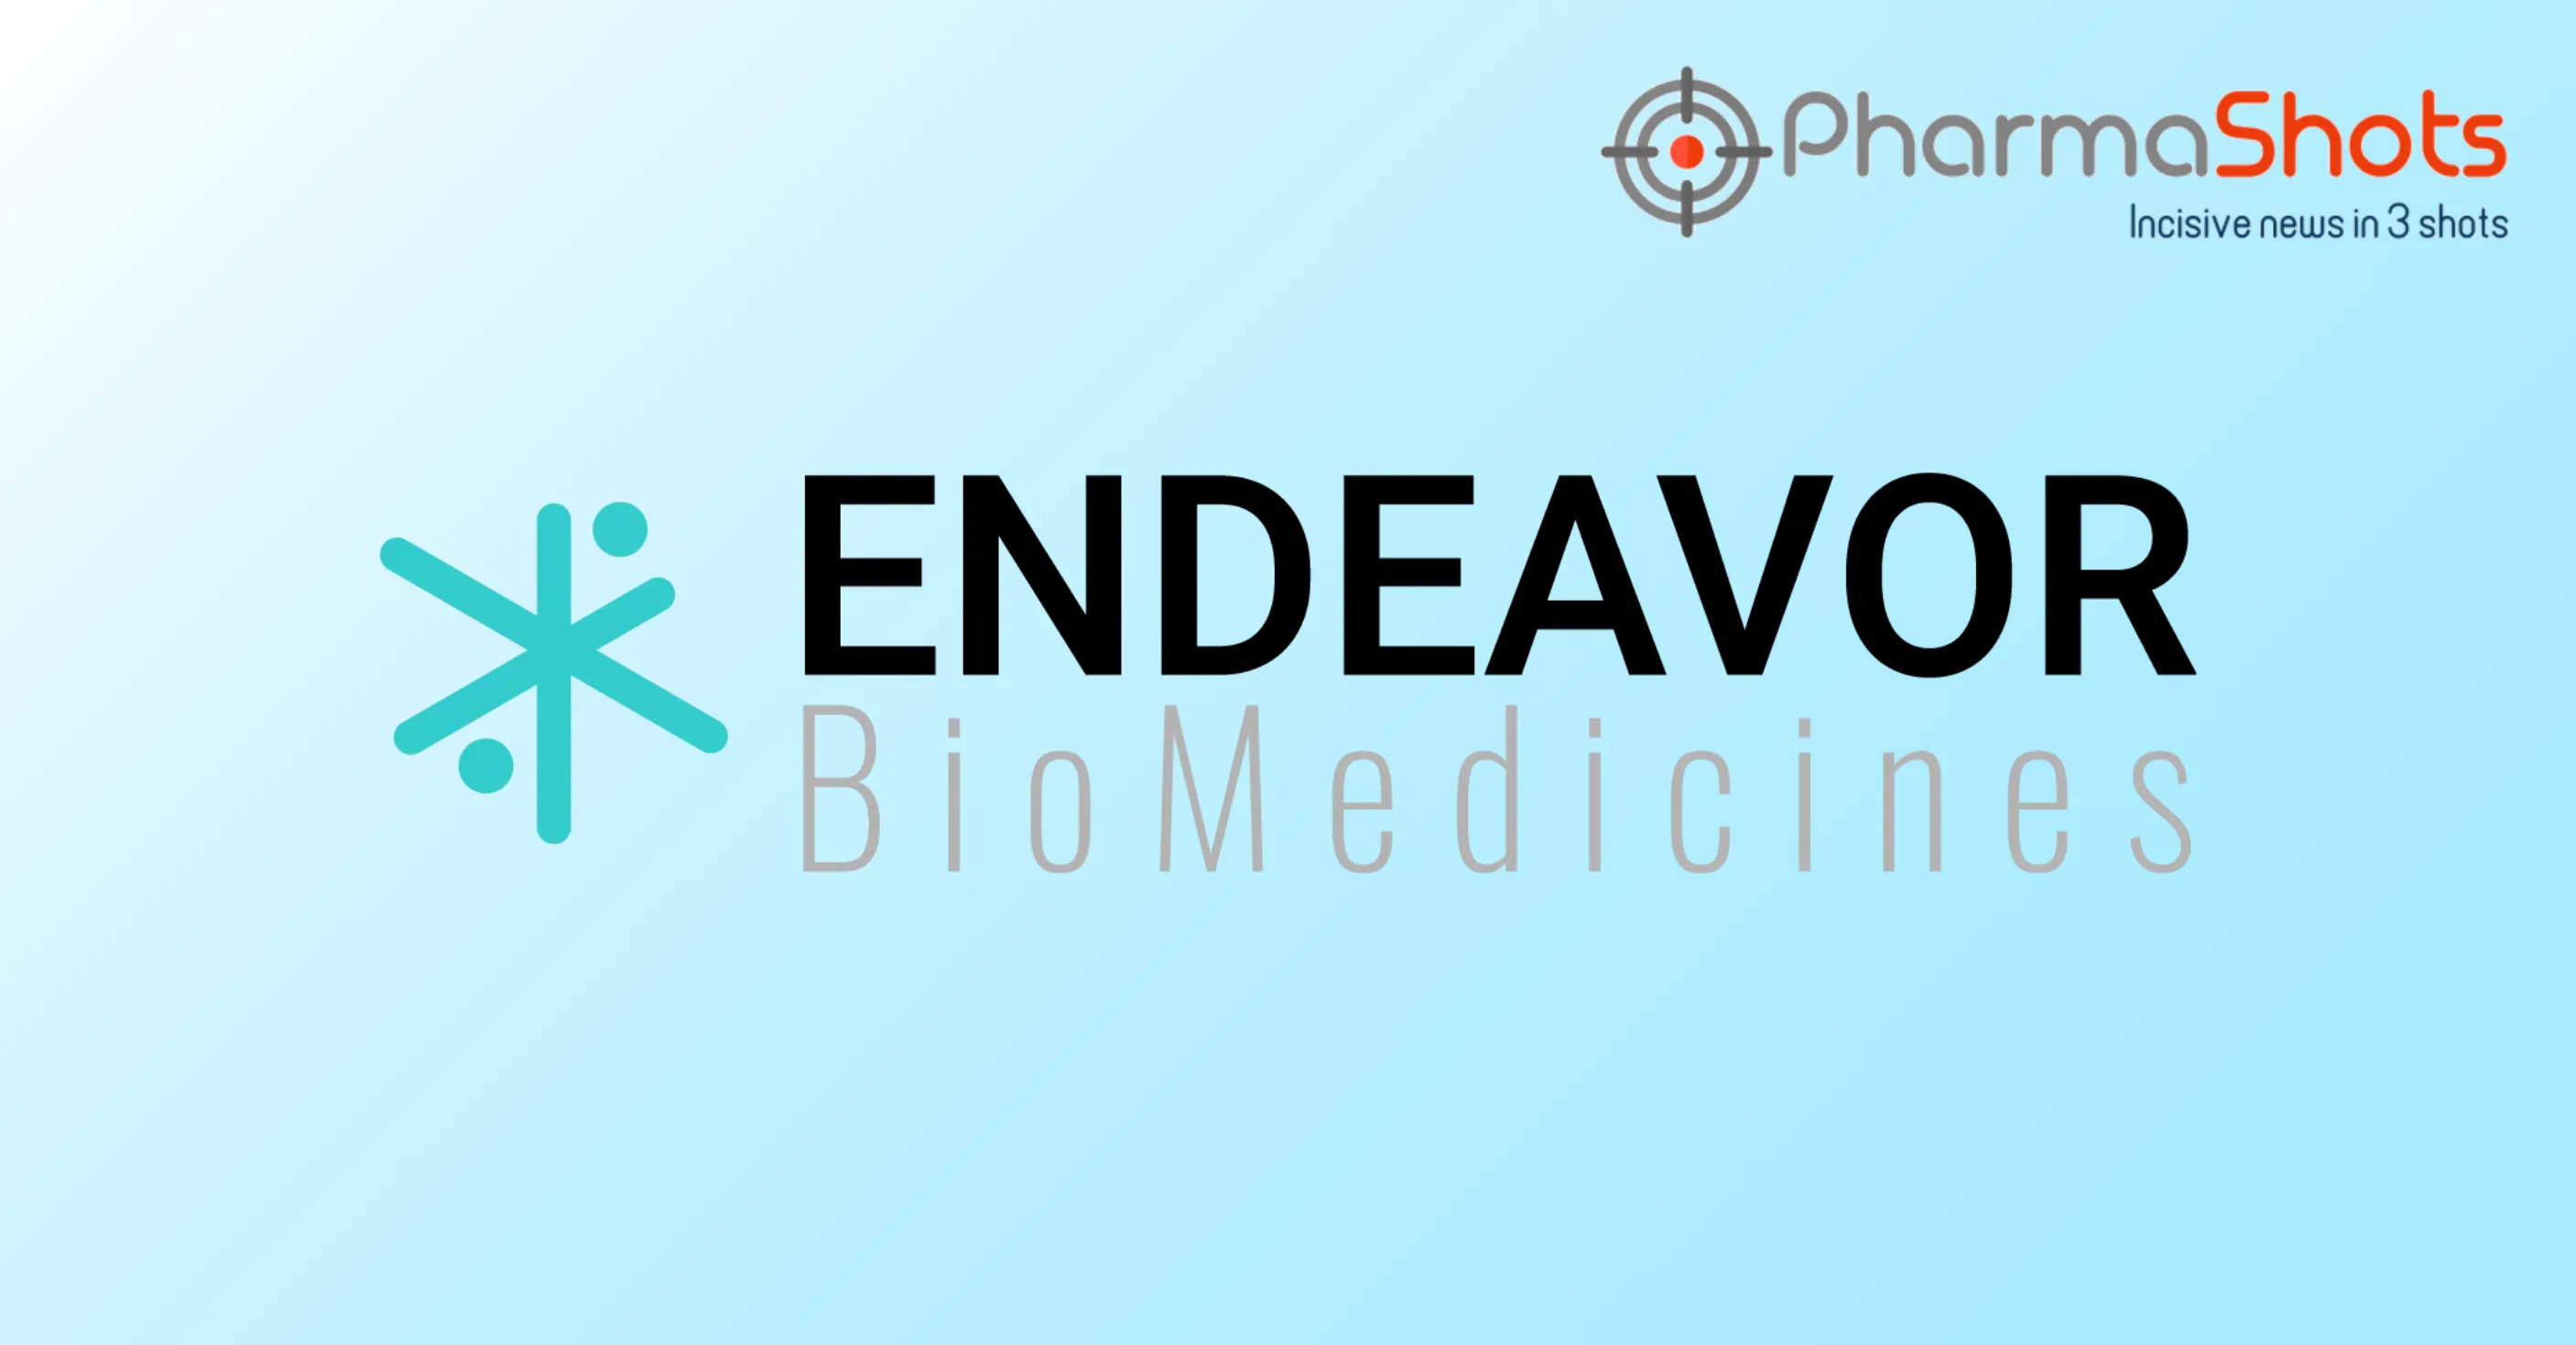 Endeavor BioMedicines Reports Results from the P-IIa Study of ENV-101 for Treating Idiopathic Pulmonary Fibrosis